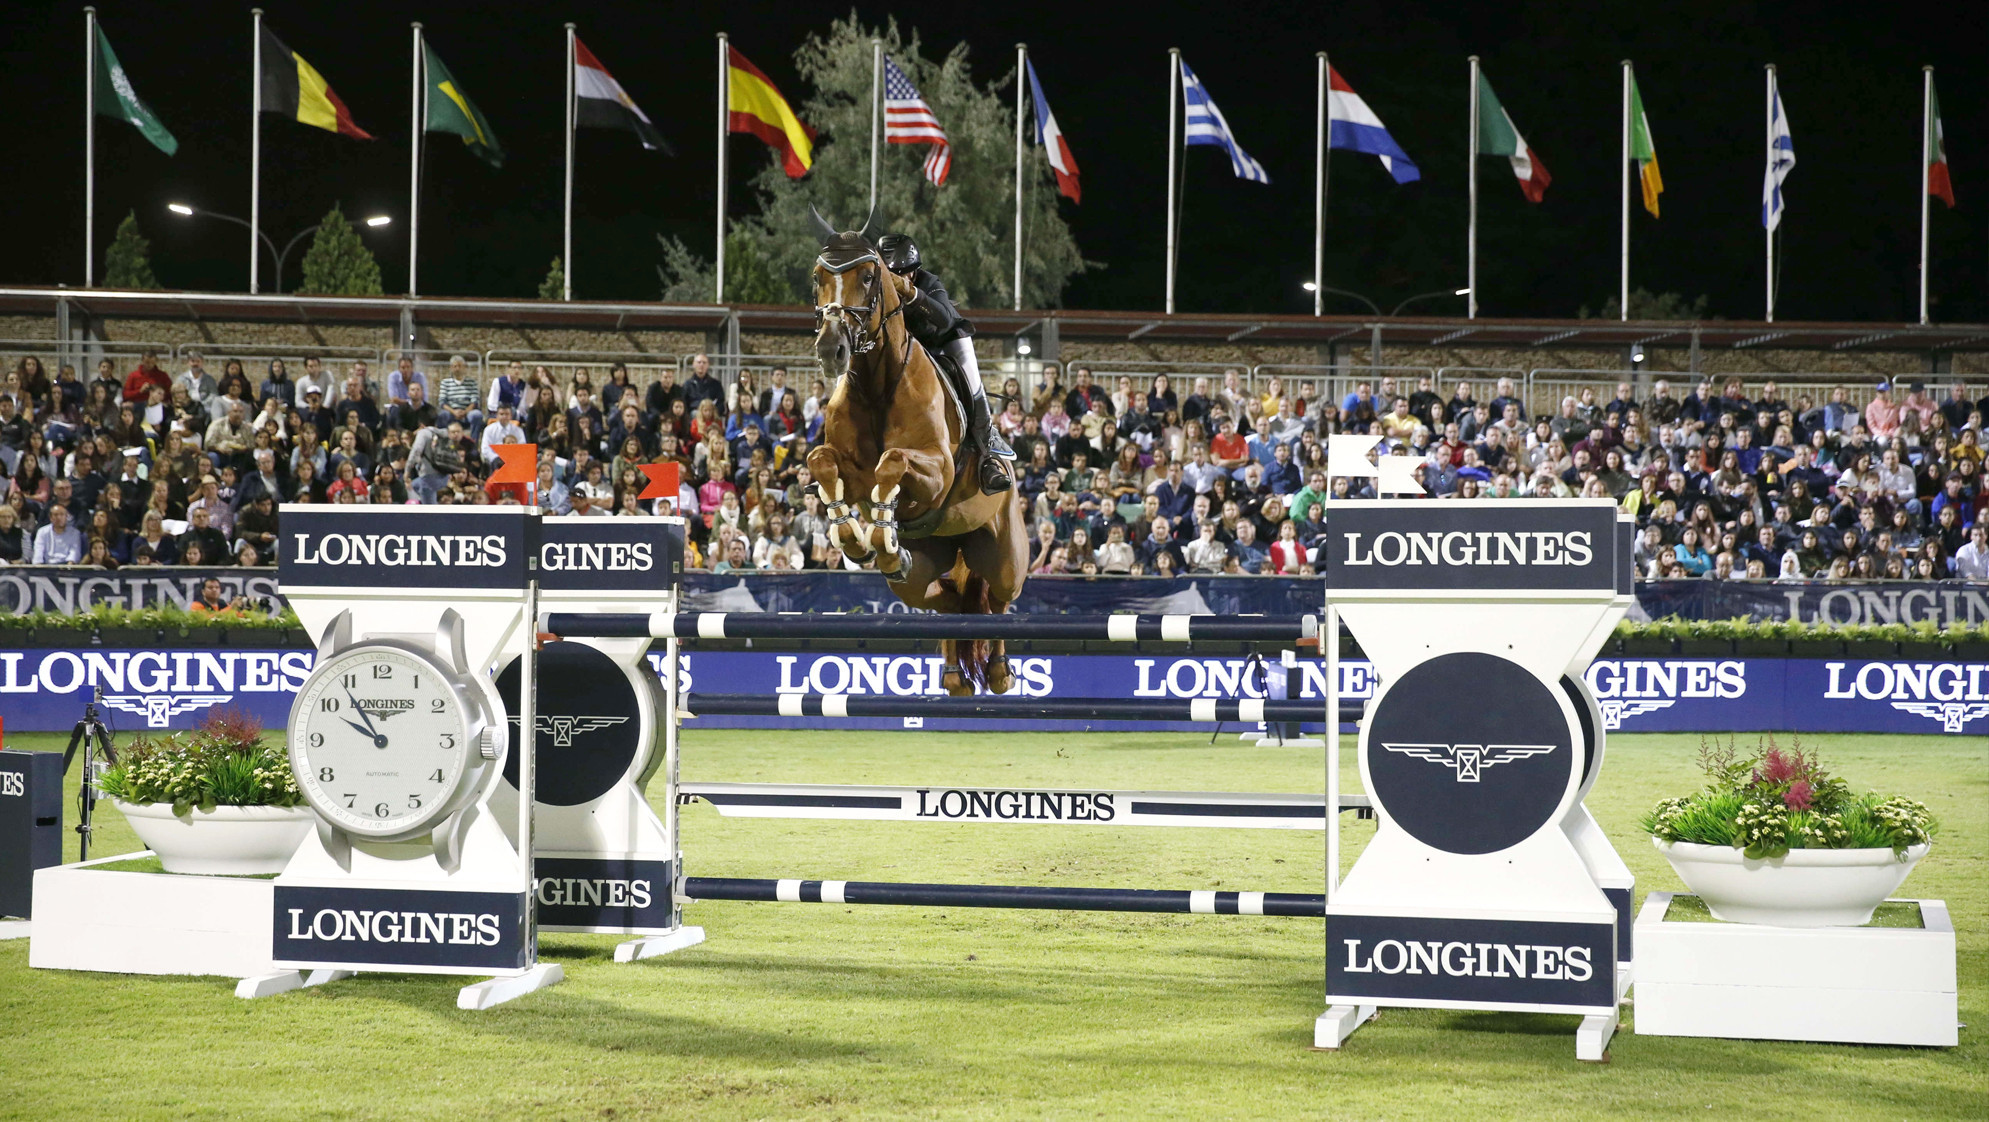 The world's best show jumpers will compete in Cascais once again this week ©LGCT